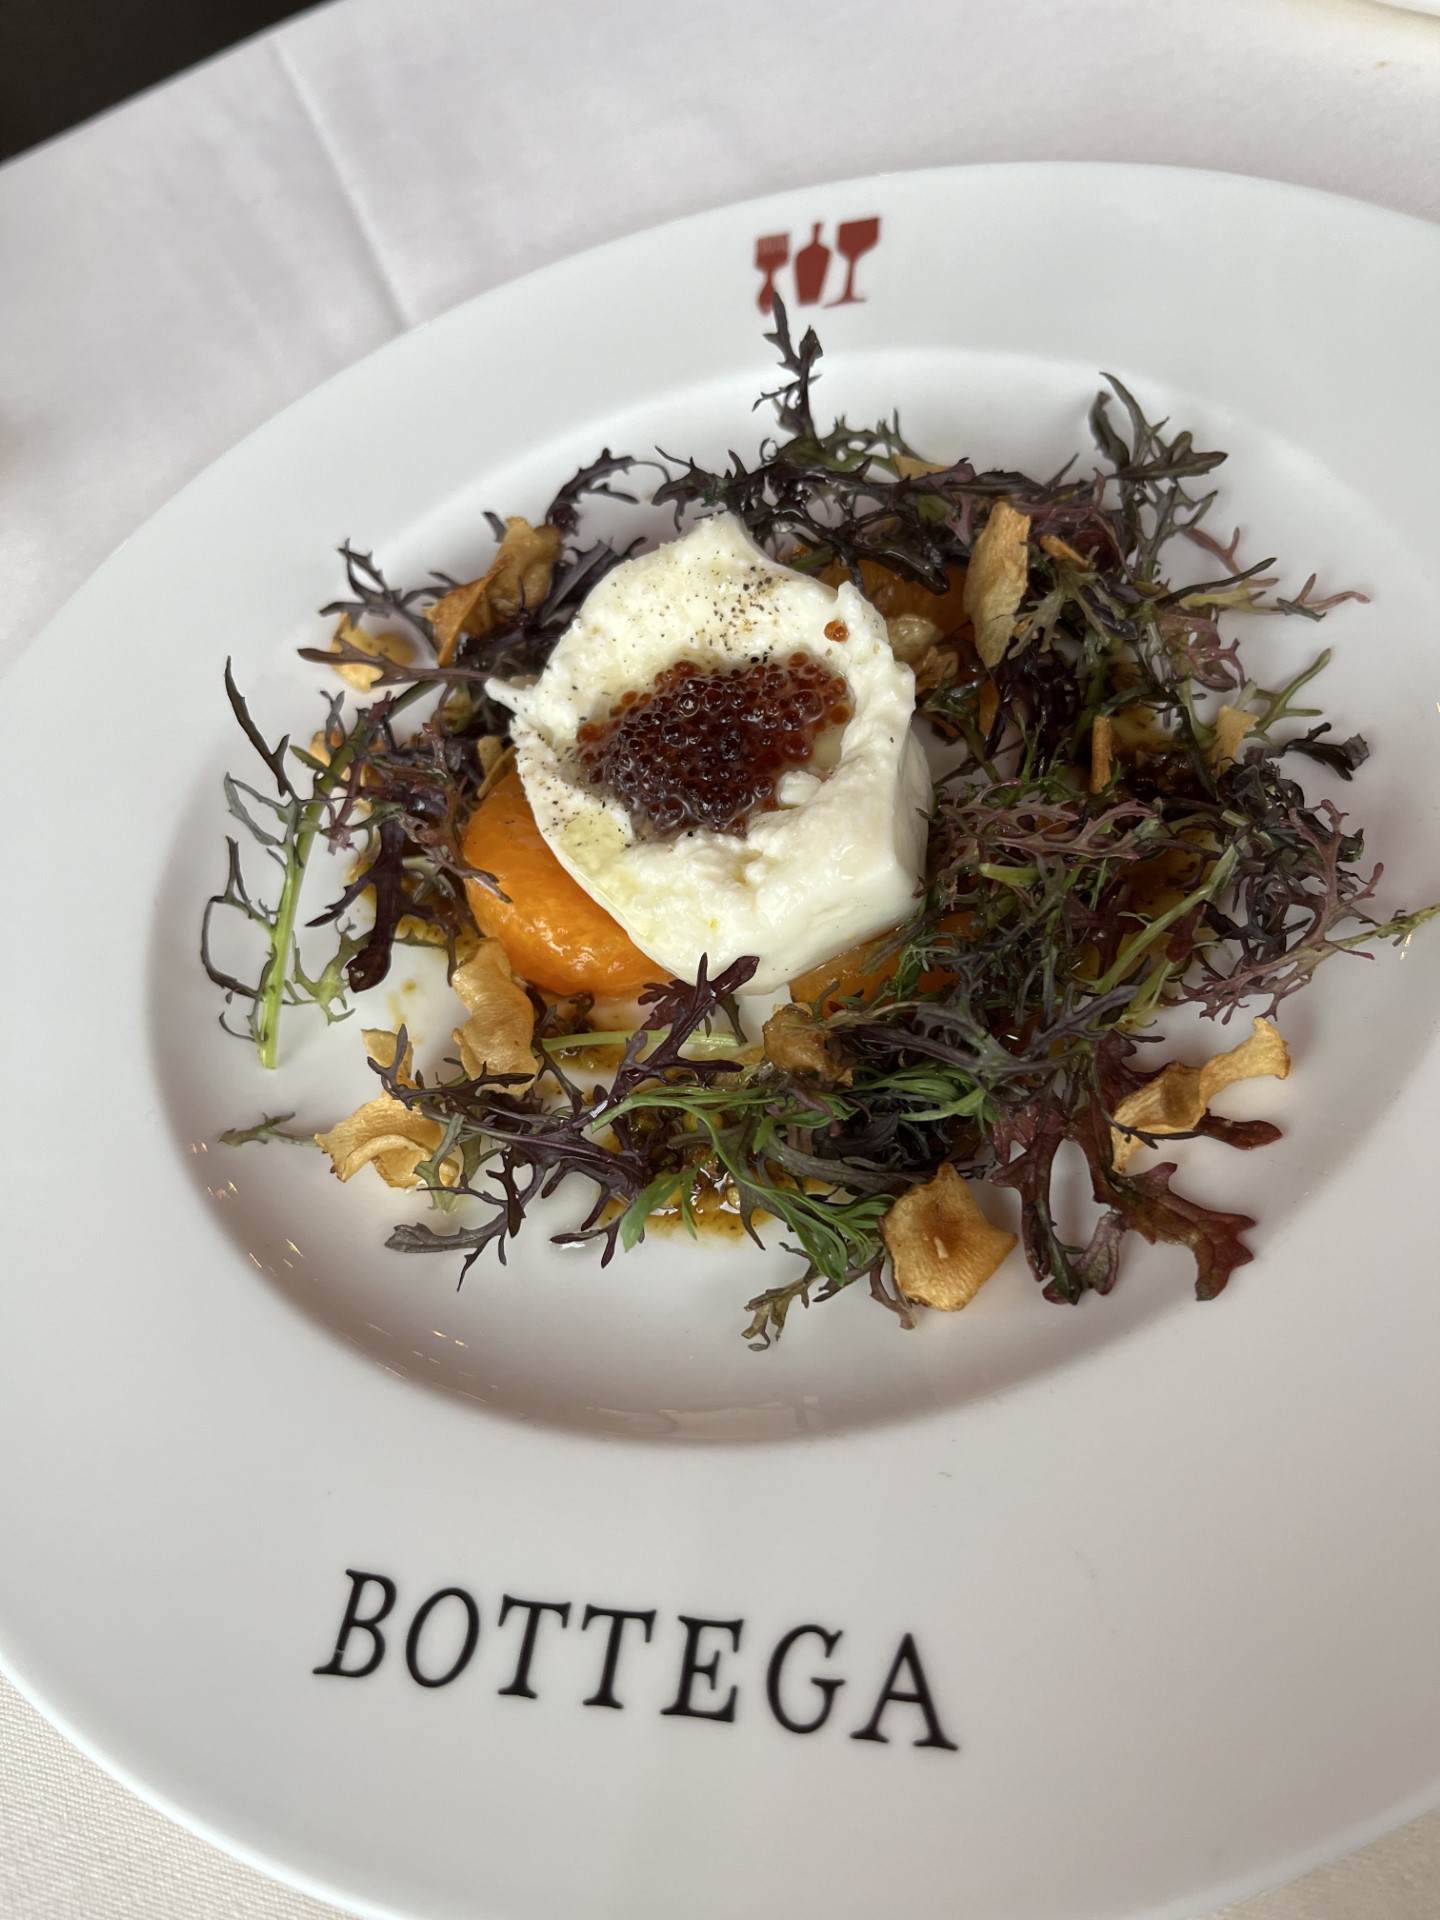 A creamy white entree dish placed on top of a leafy garnish sits on a white plate with the word "BOTTEGA" in black letters on the rim.